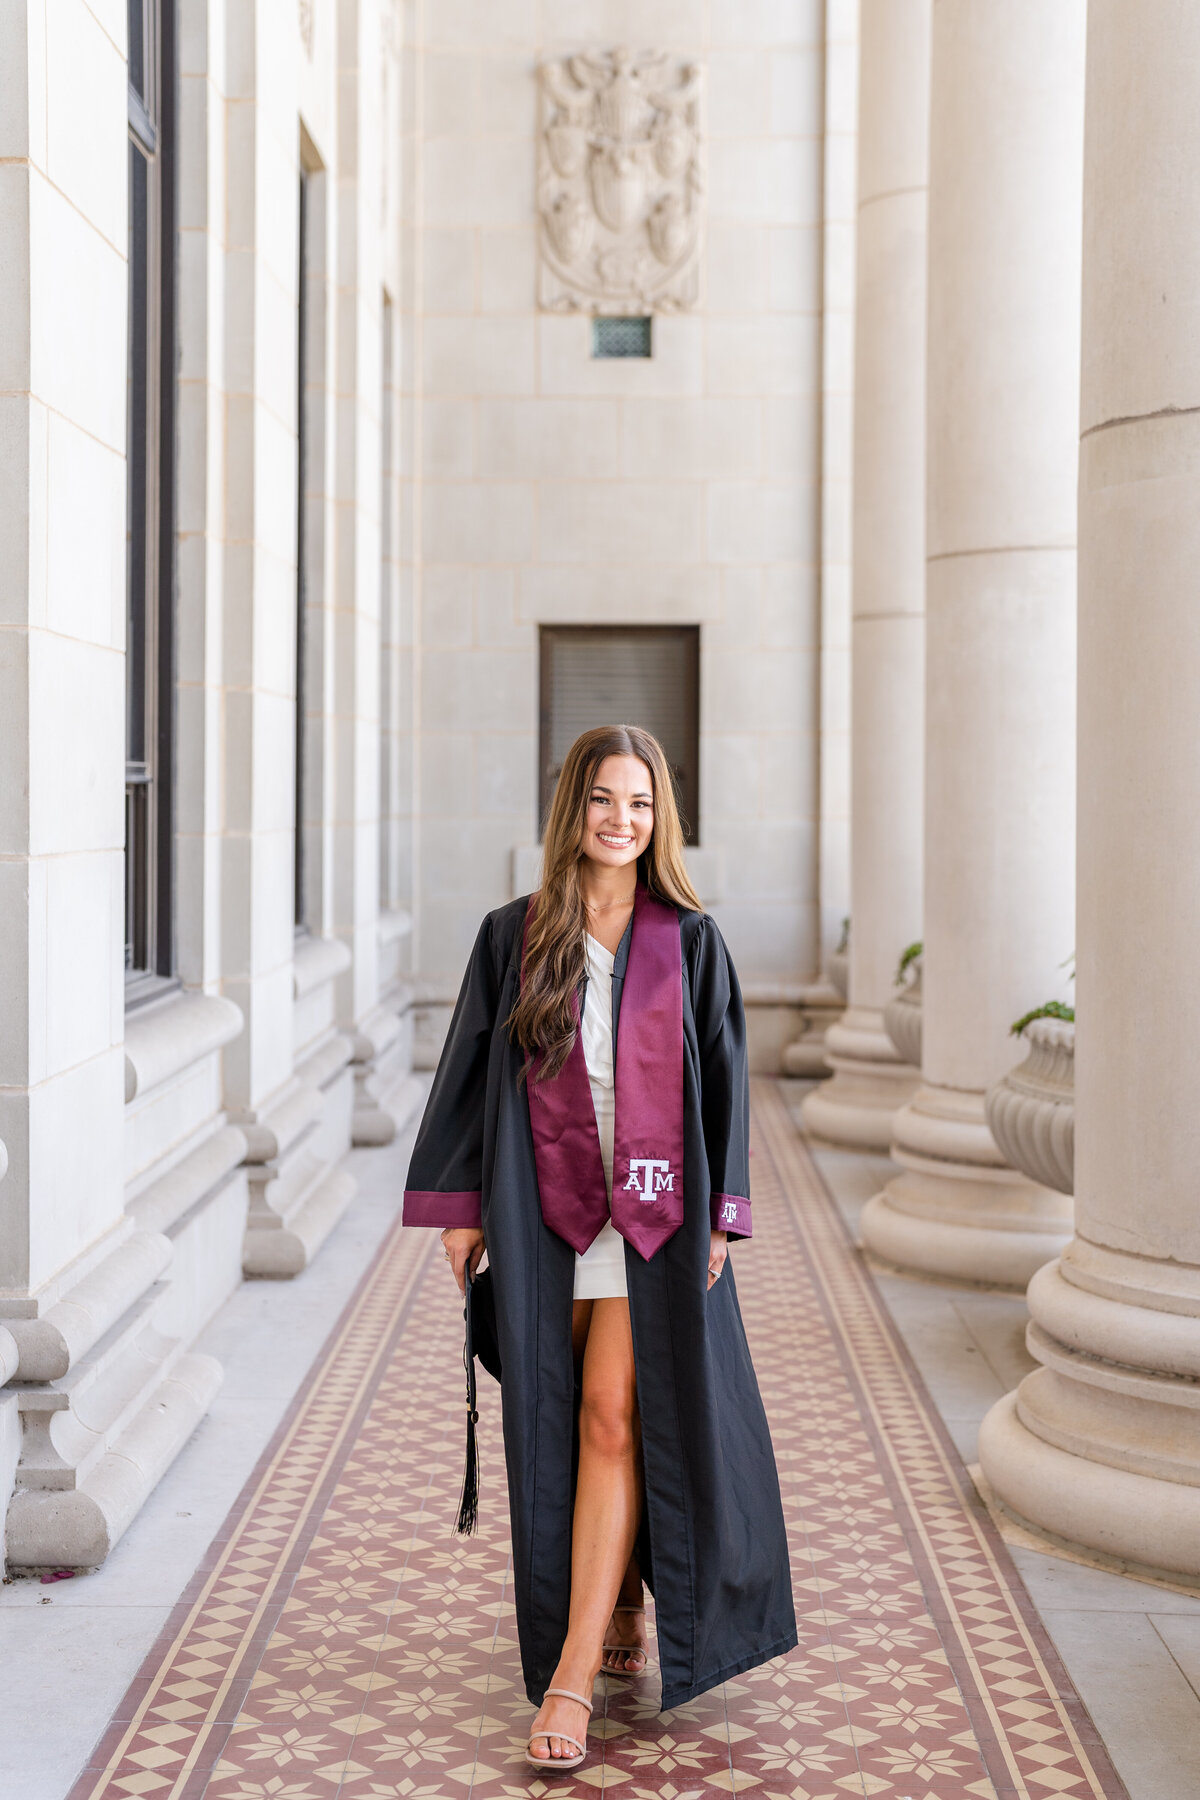 Texas A&M senior girl walking and holding grad cap while wearing gown and Aggie stole in the columns of the Administration Building